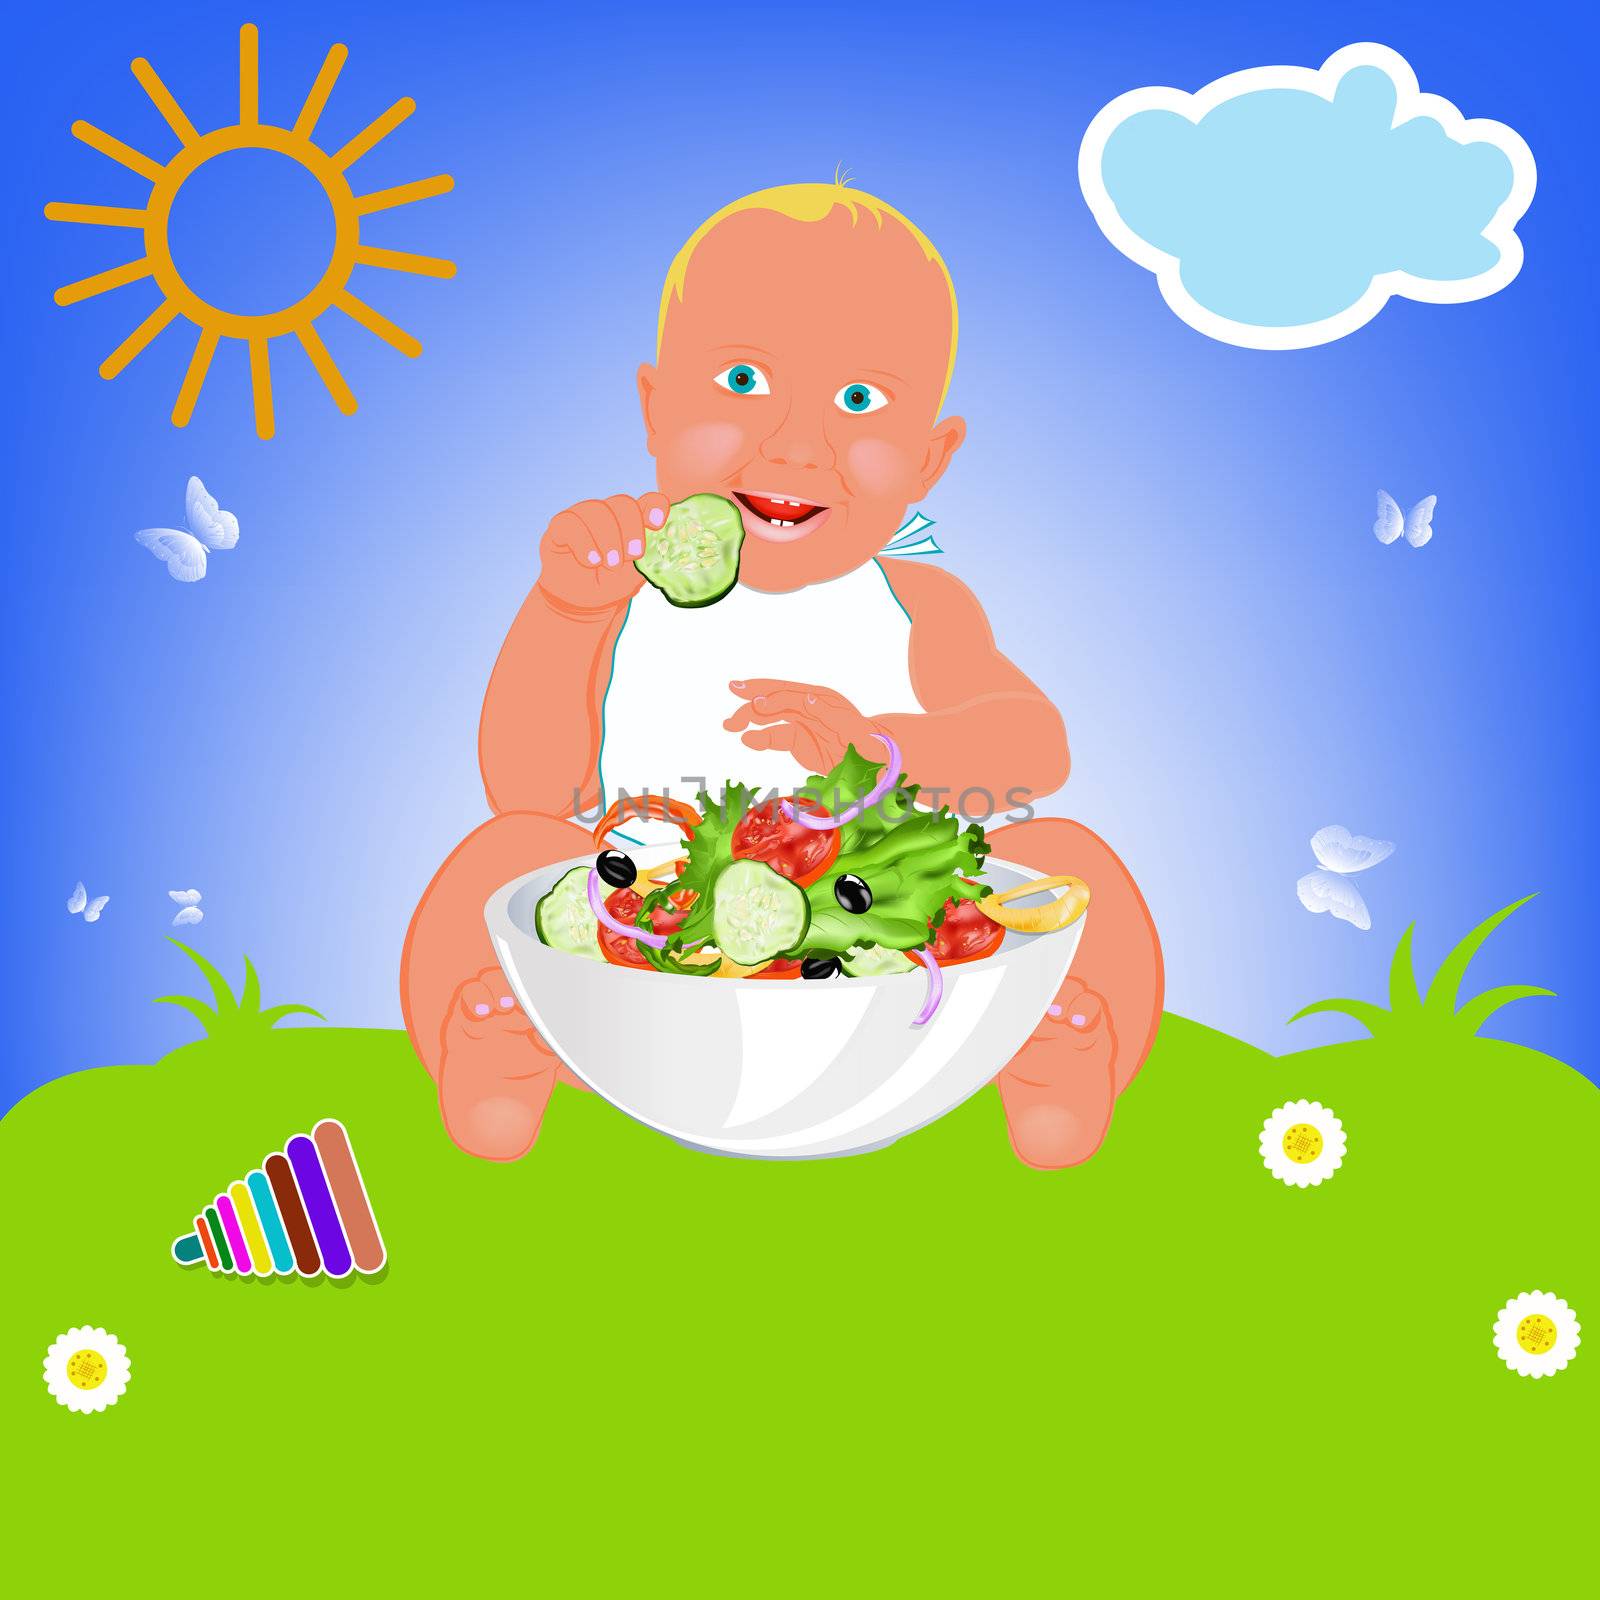 Child and fresh vegetable salad on a green summer meadow by sergey150770SV